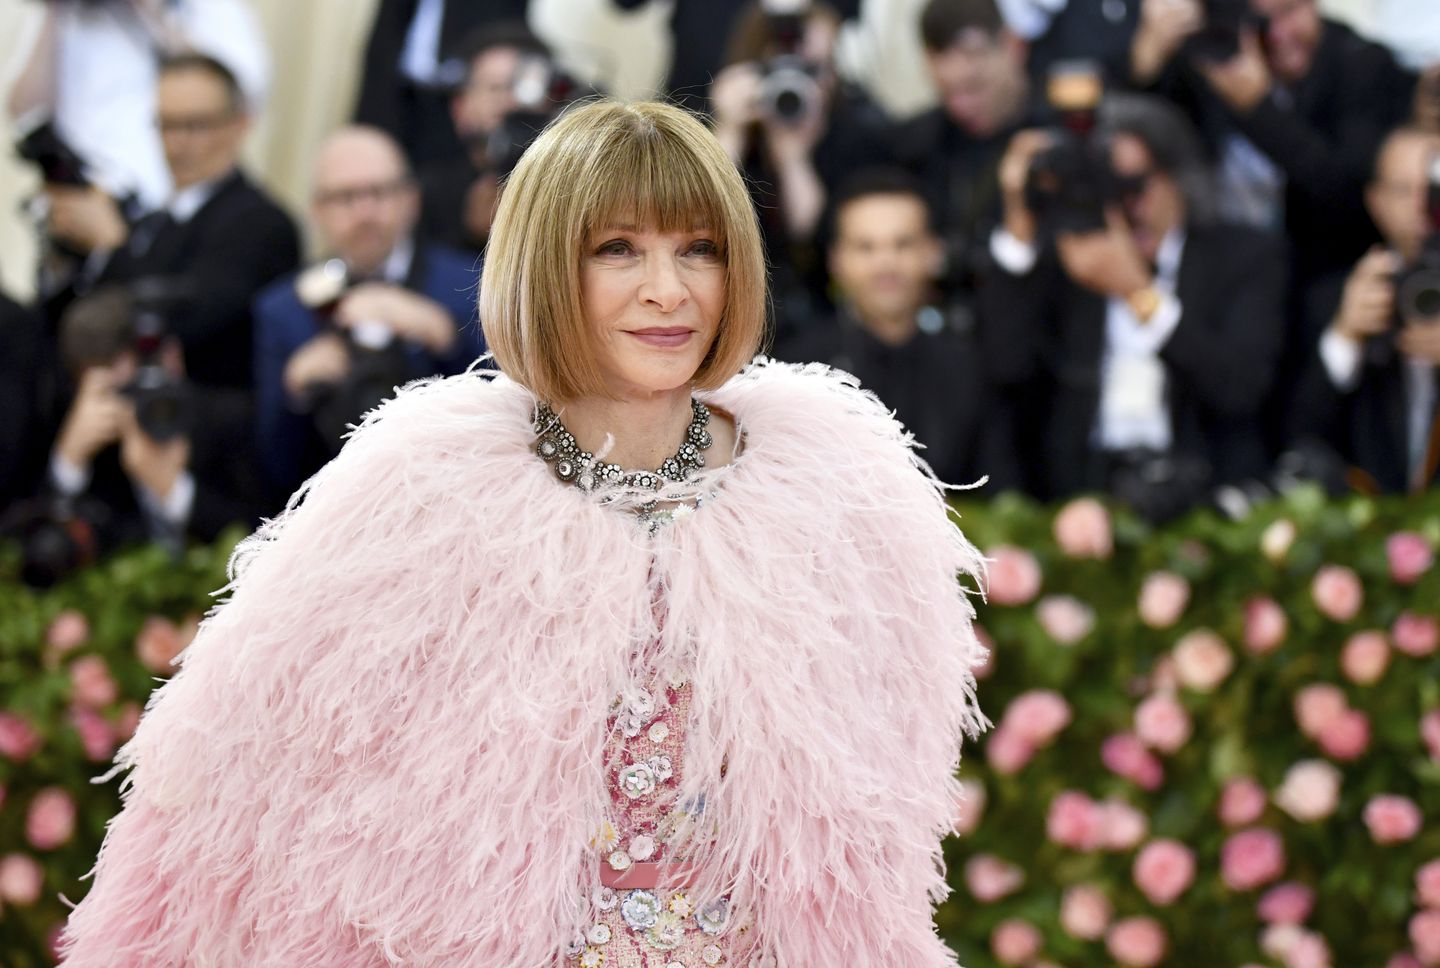 Anna Wintour Apologizes and Takes 'Responsibility' for Lack of Black Creatives